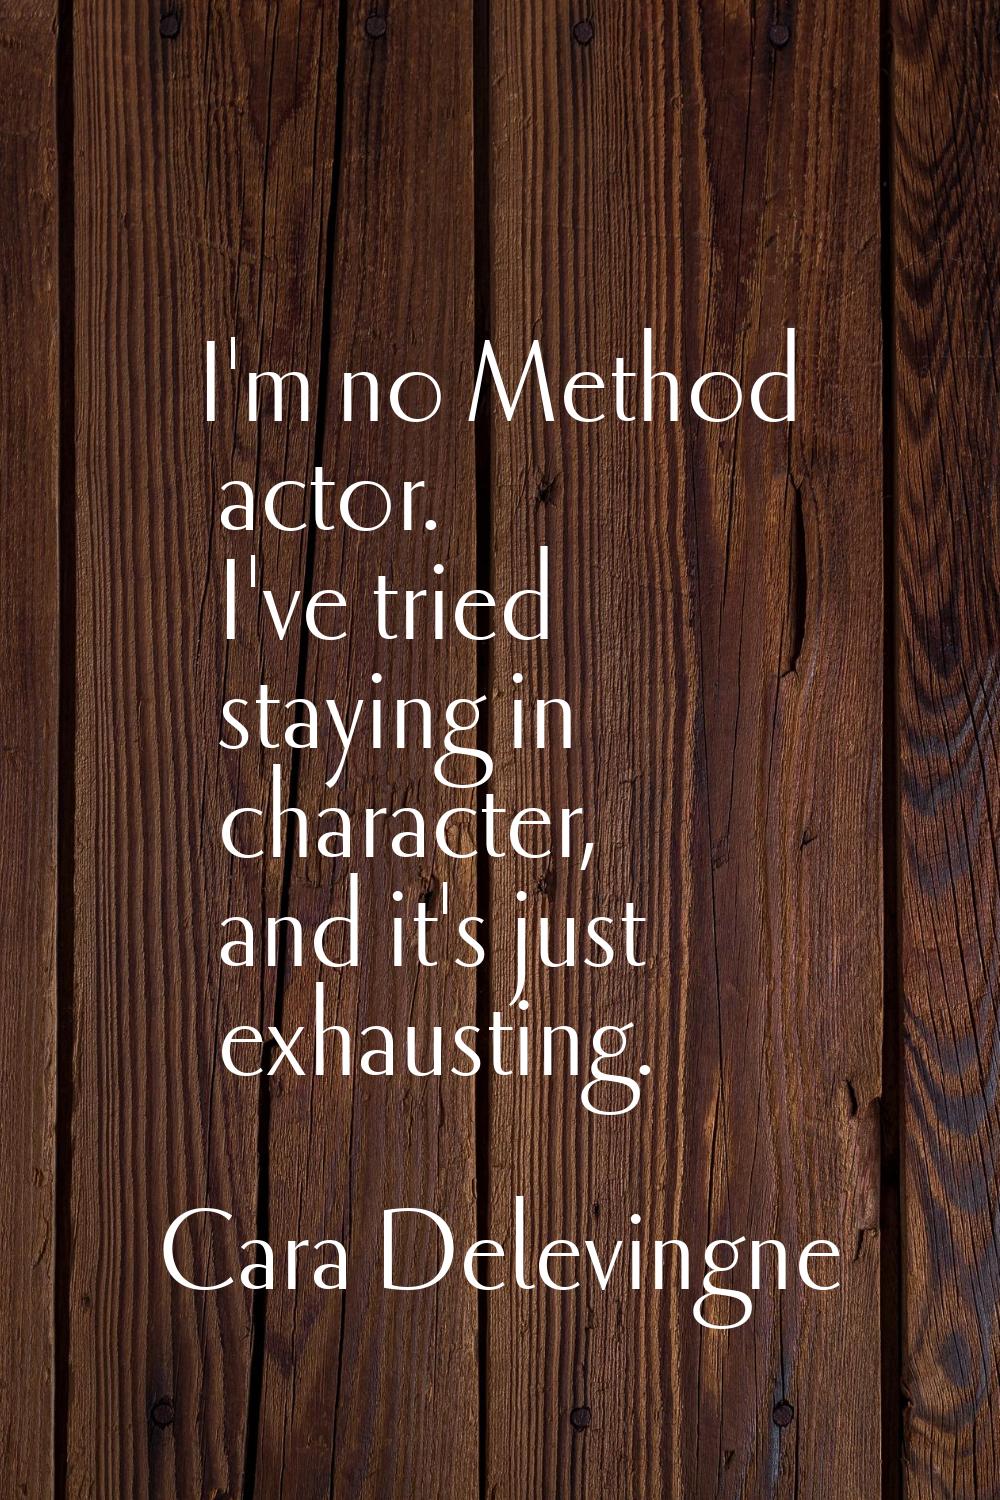 I'm no Method actor. I've tried staying in character, and it's just exhausting.